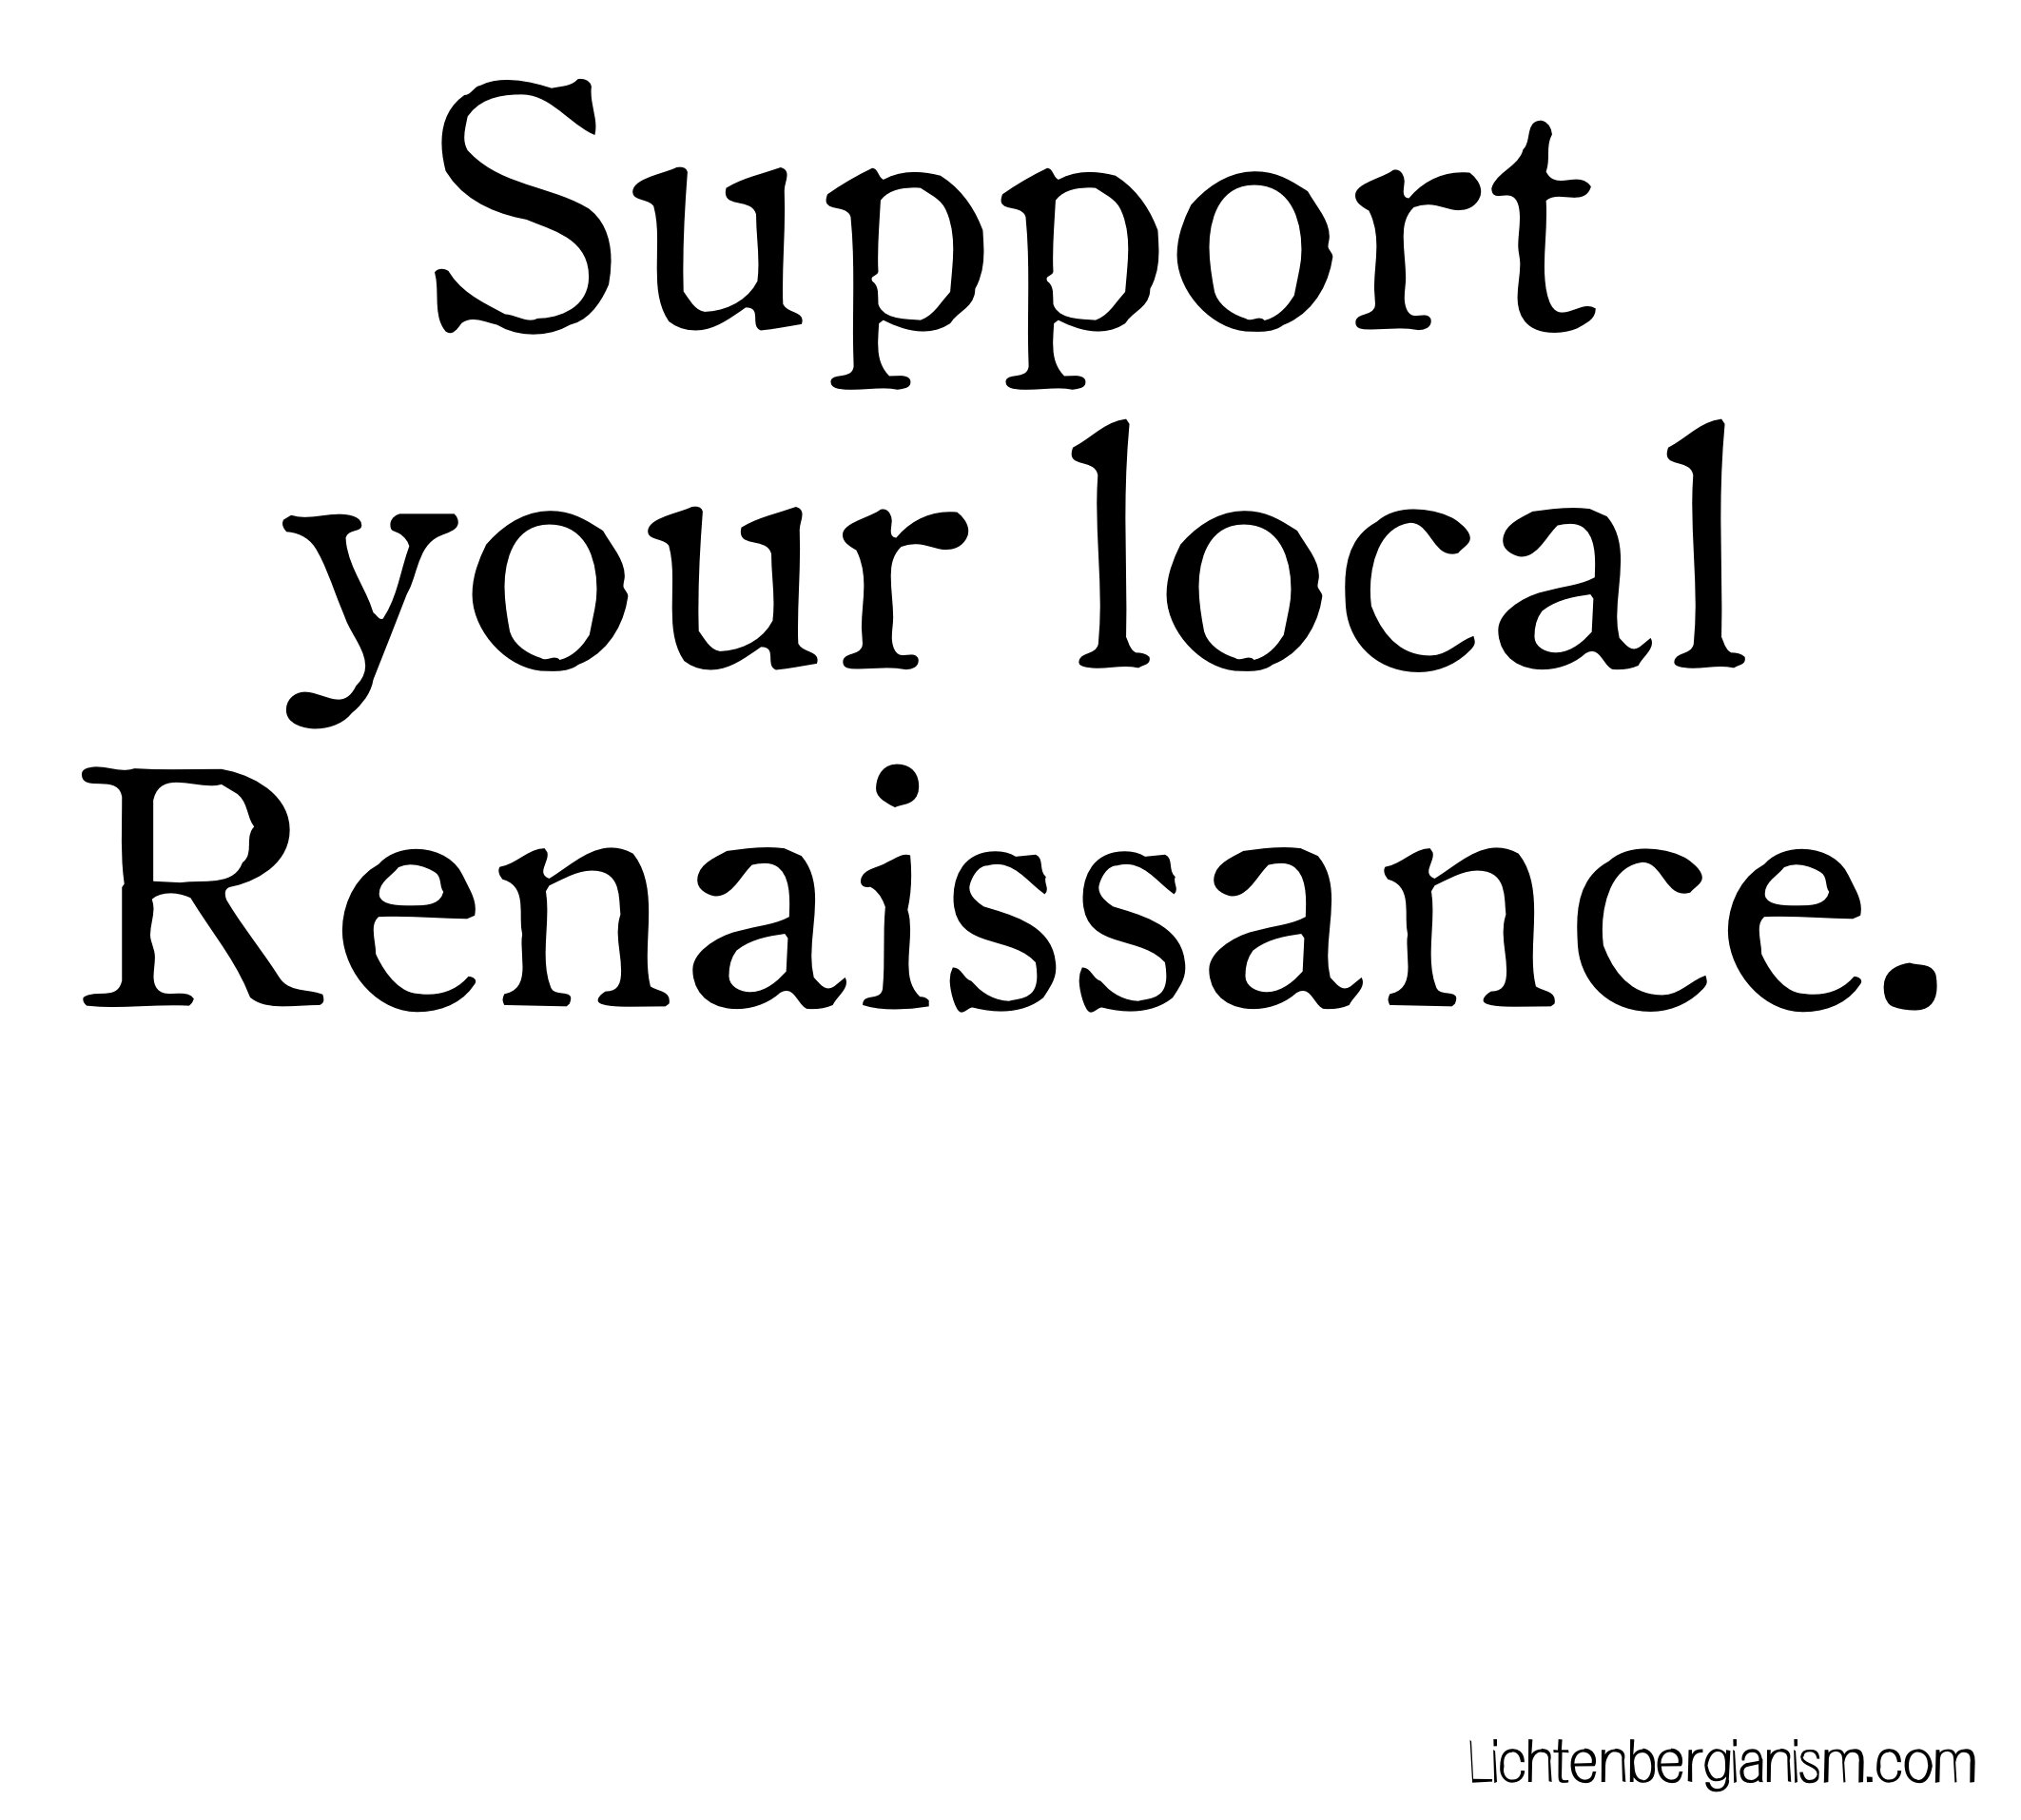 support your local renaissance - oldstyle hplhs.jpg